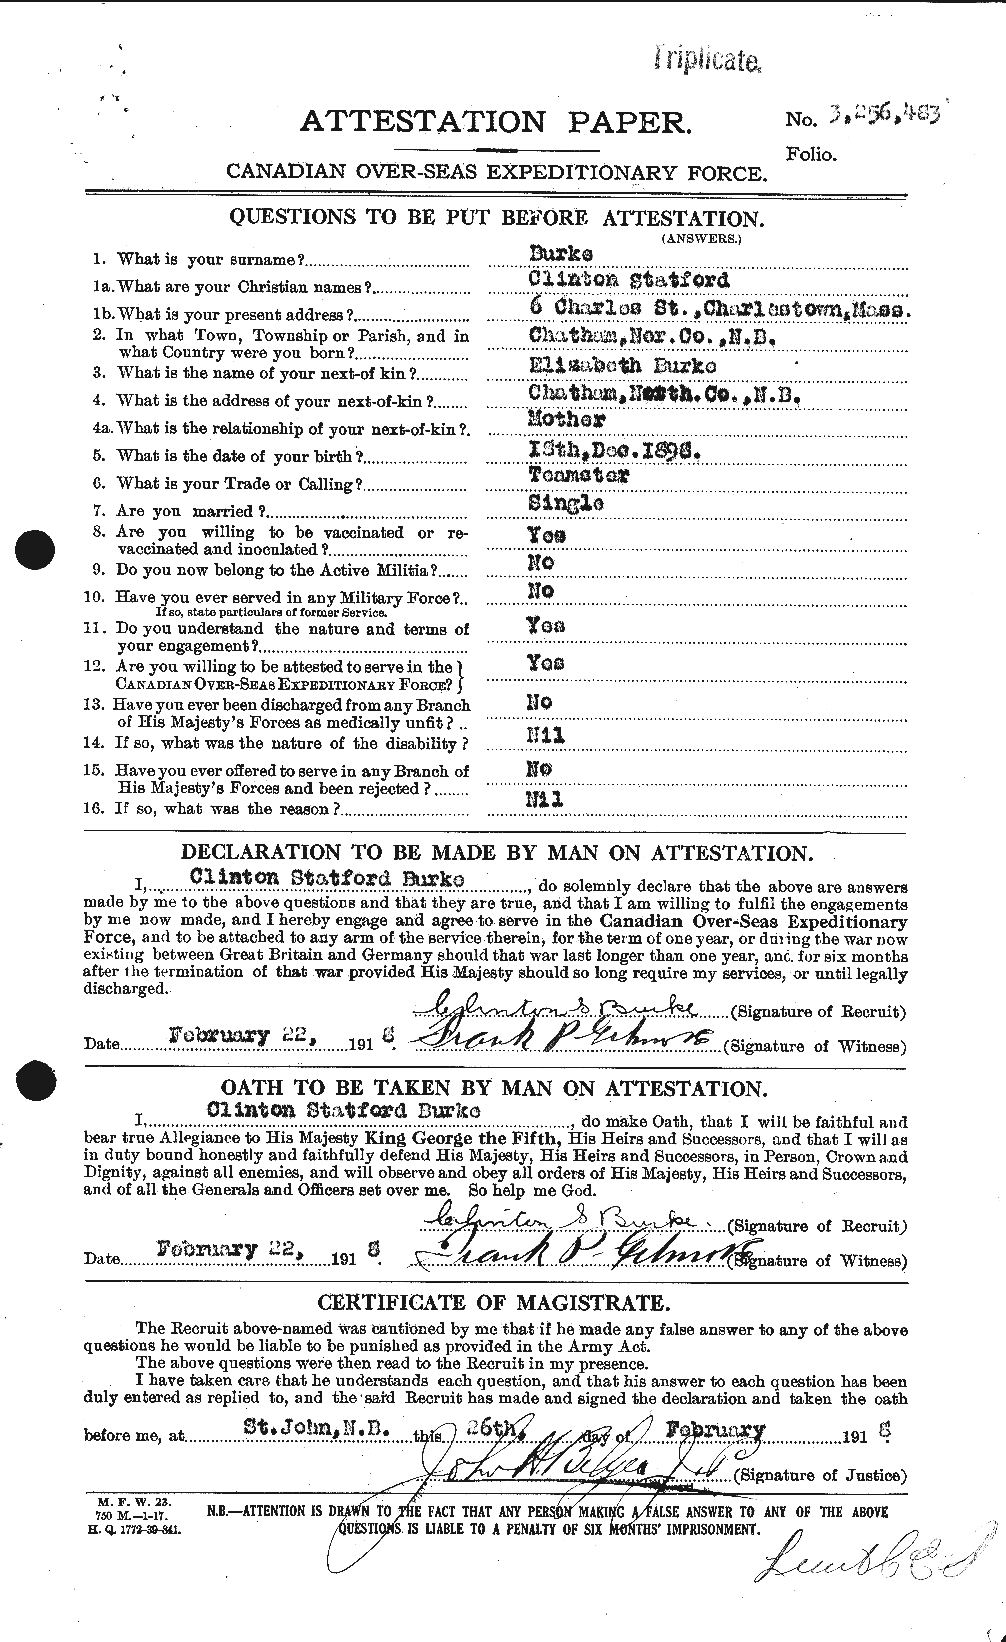 Personnel Records of the First World War - CEF 272395a